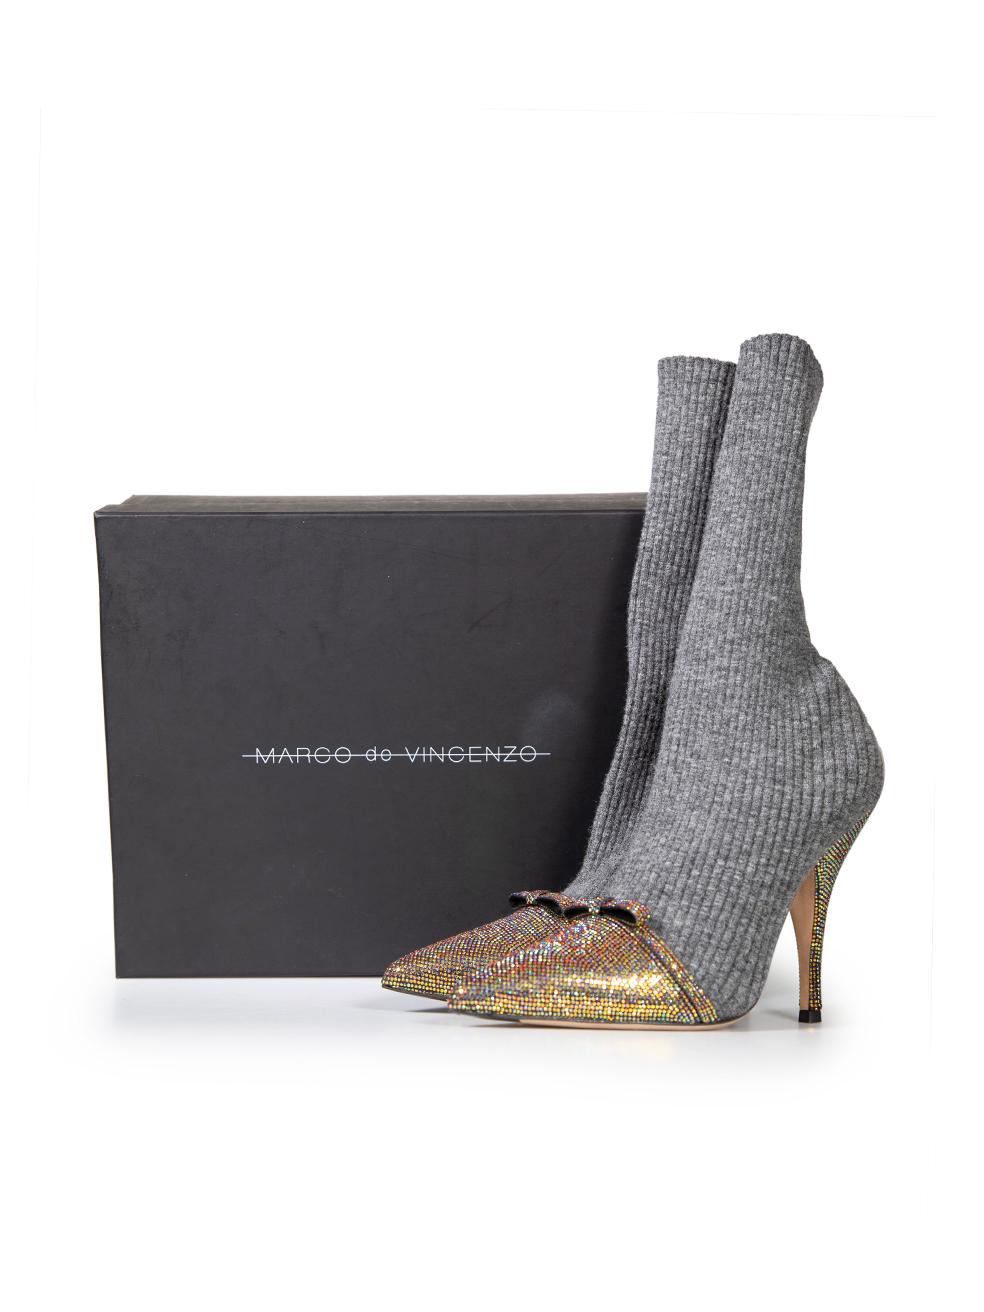 Marco de Vincenzo Grey Knit Embellished Bow Sock Boots Size IT 38.5 For Sale 1